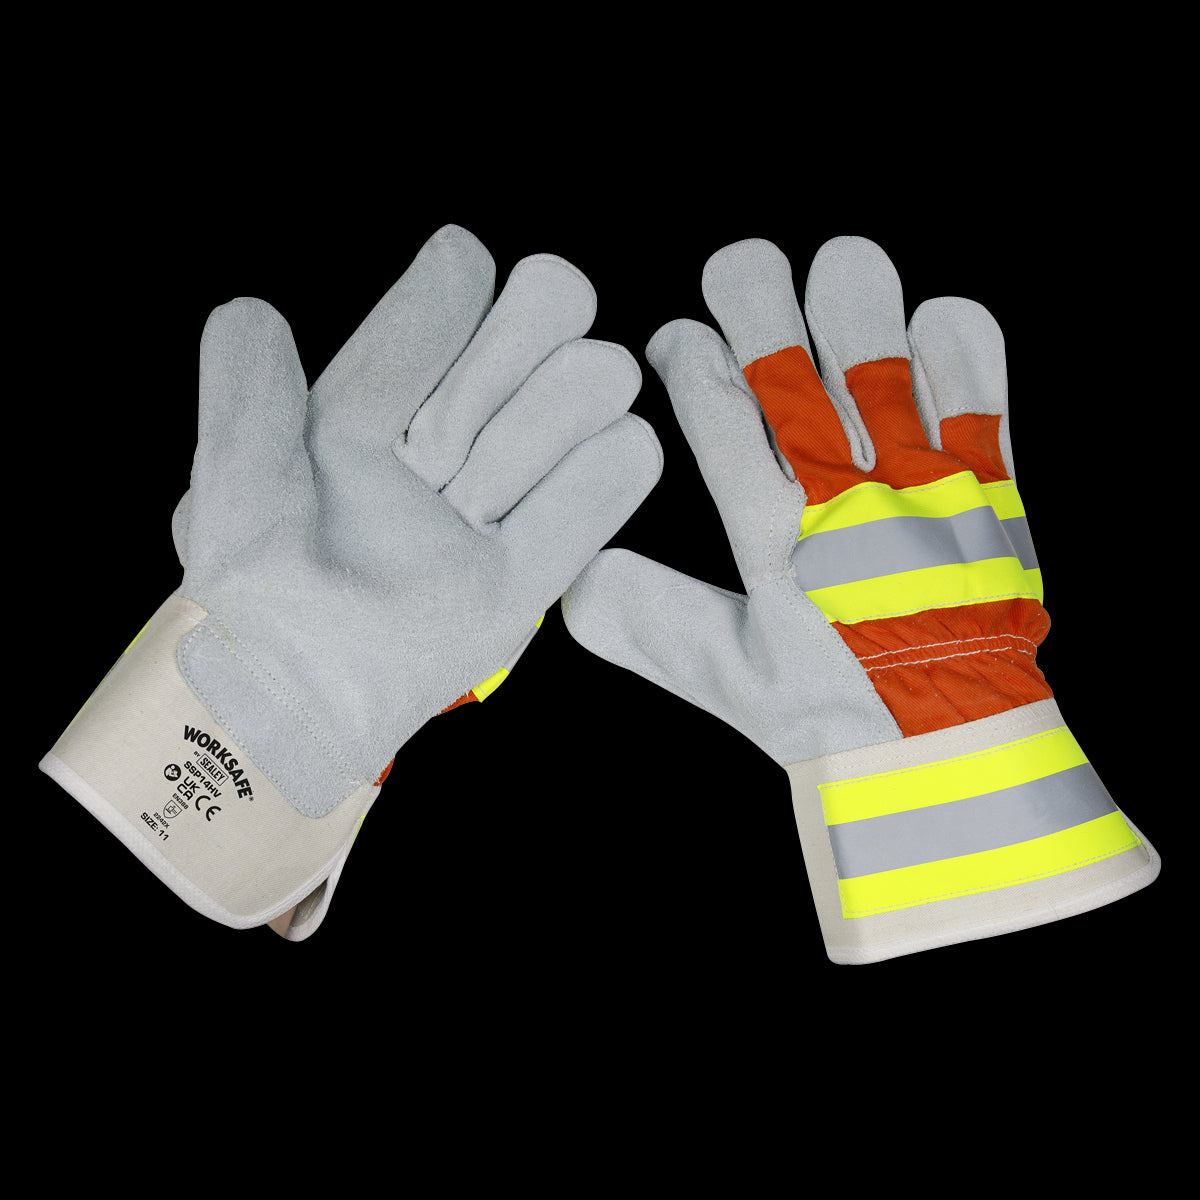 Worksafe by Sealey Reflective Rigger's Gloves Pack of 6 Pairs